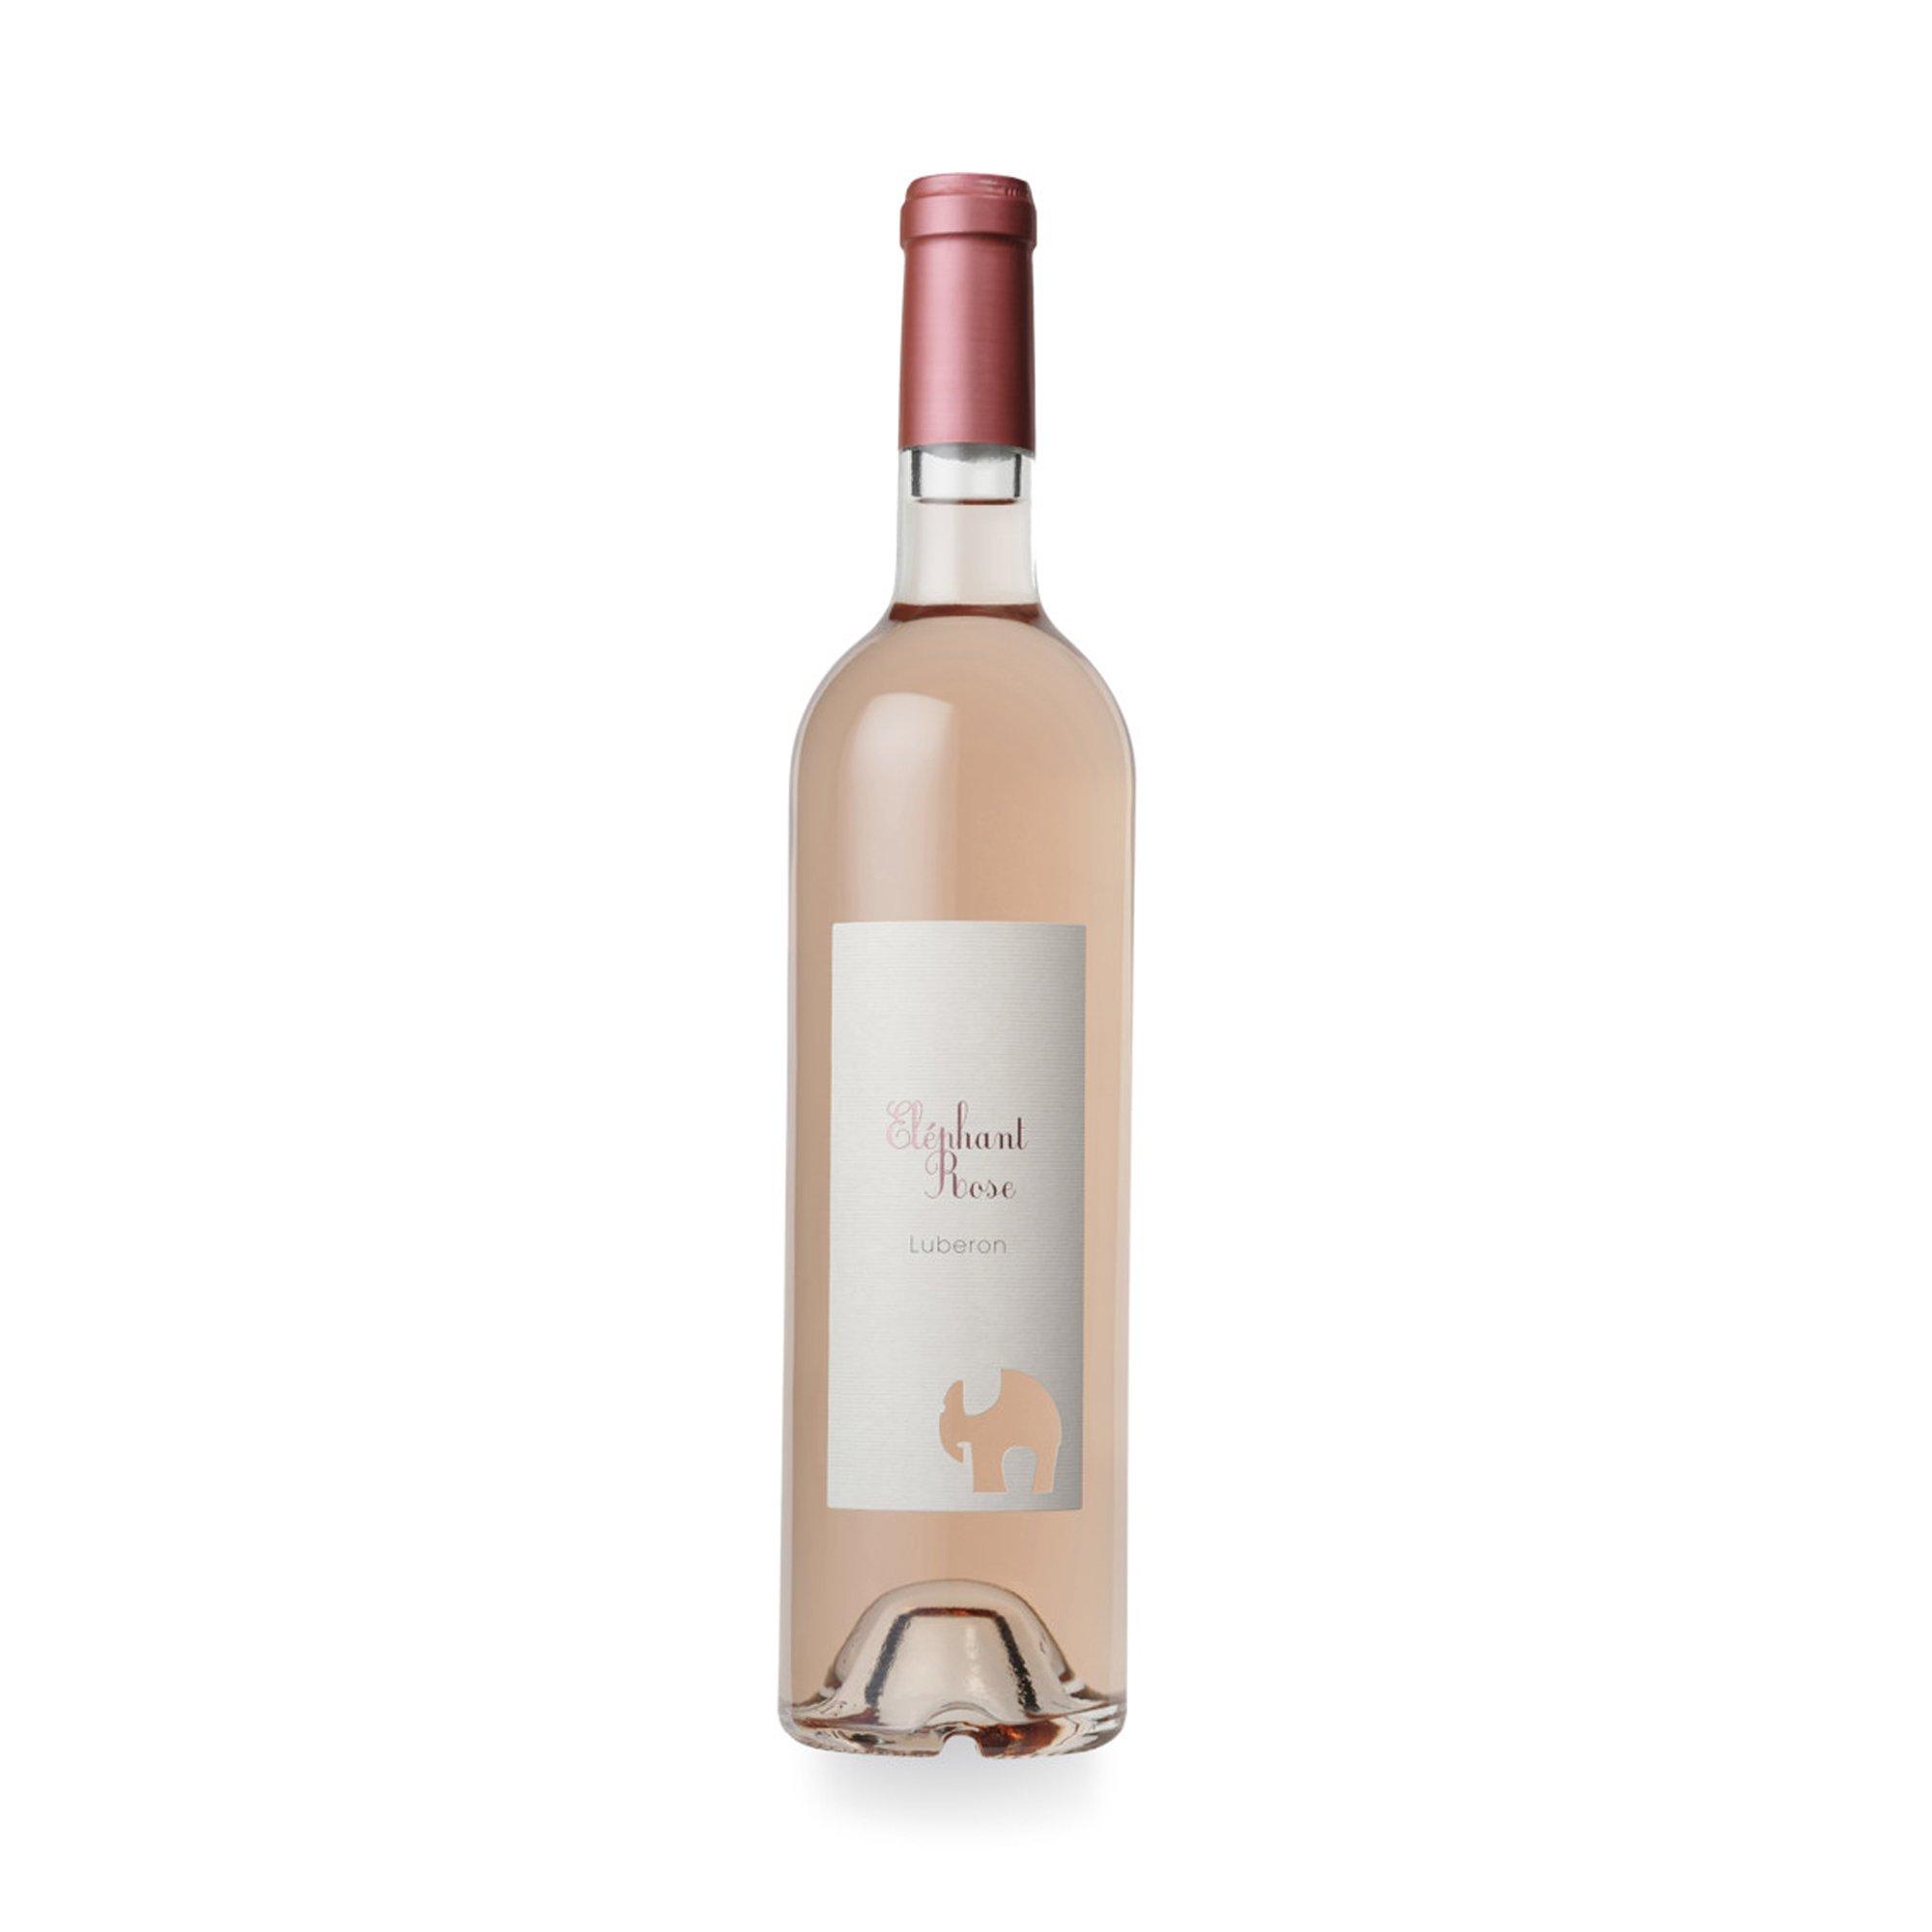 Image of Famille Perrin 2020, Eléphant Rose, Luberon AOP - 75 cl